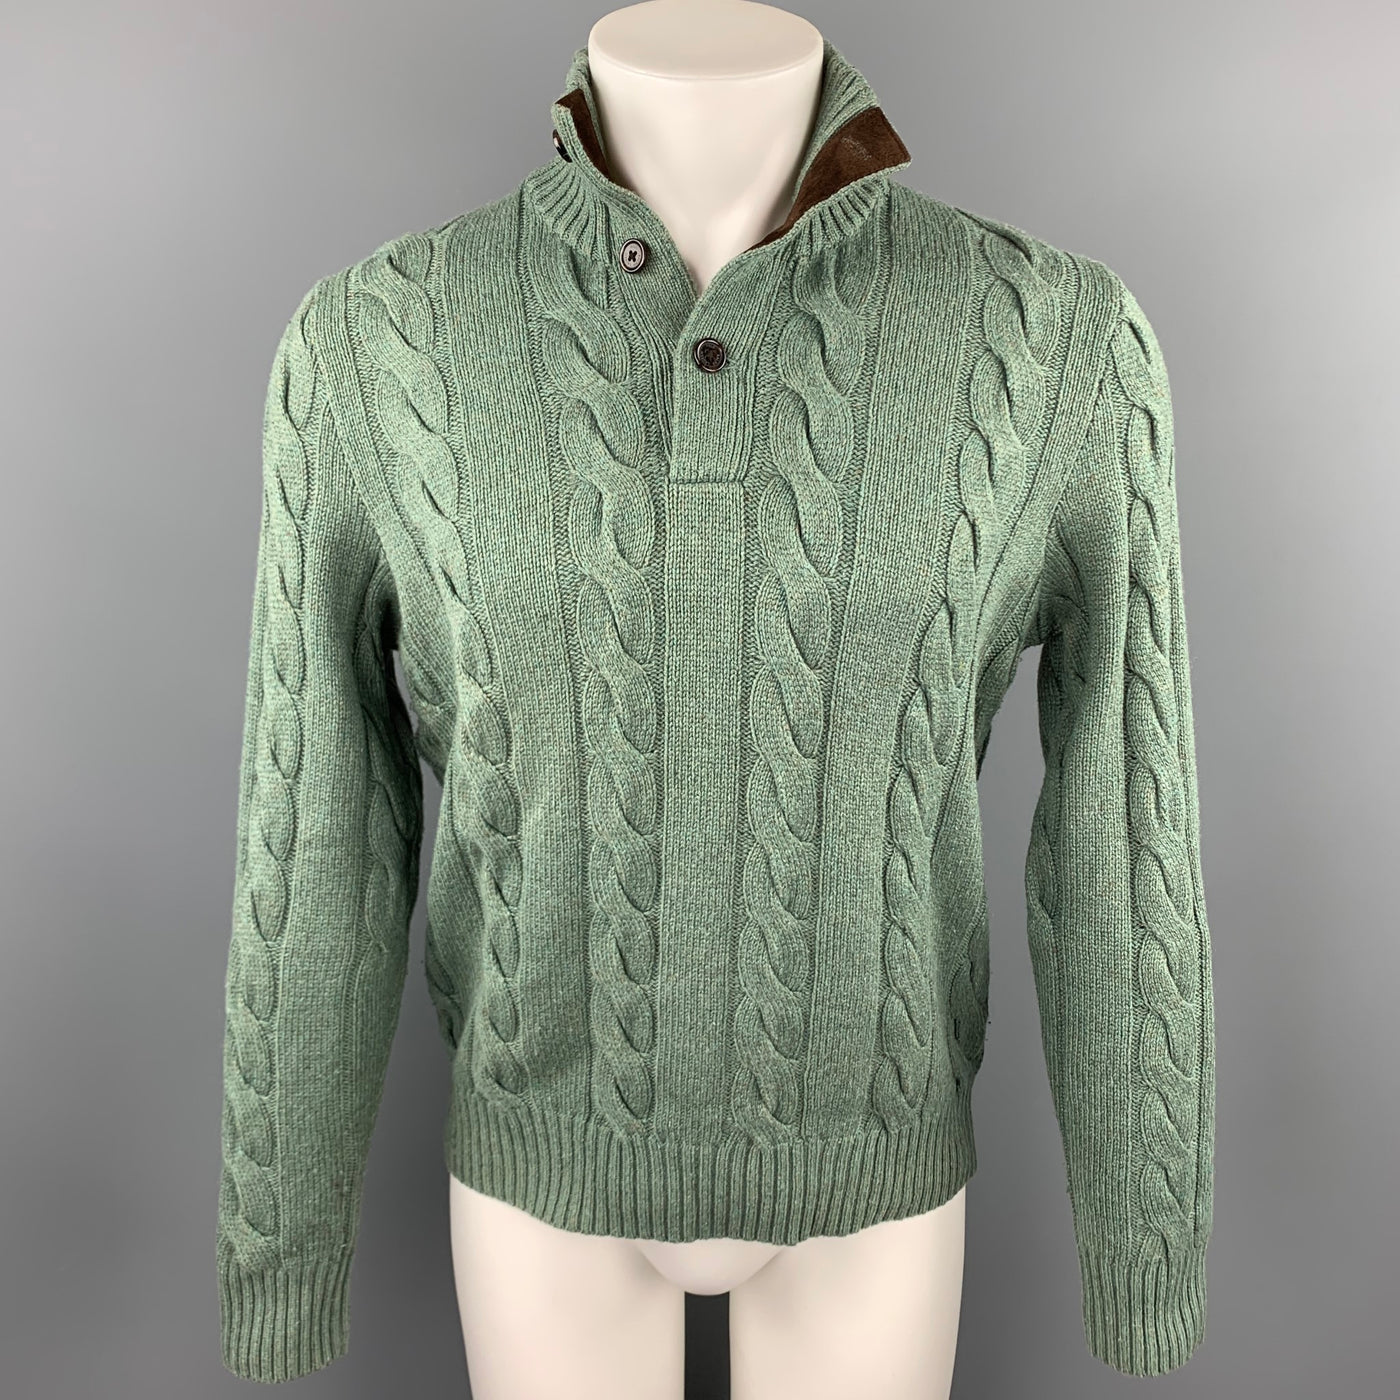 POLO by RALPH LAUREN Size S Olive Cable Knit Silk / Cashmere Mock Turtleneck Sweater